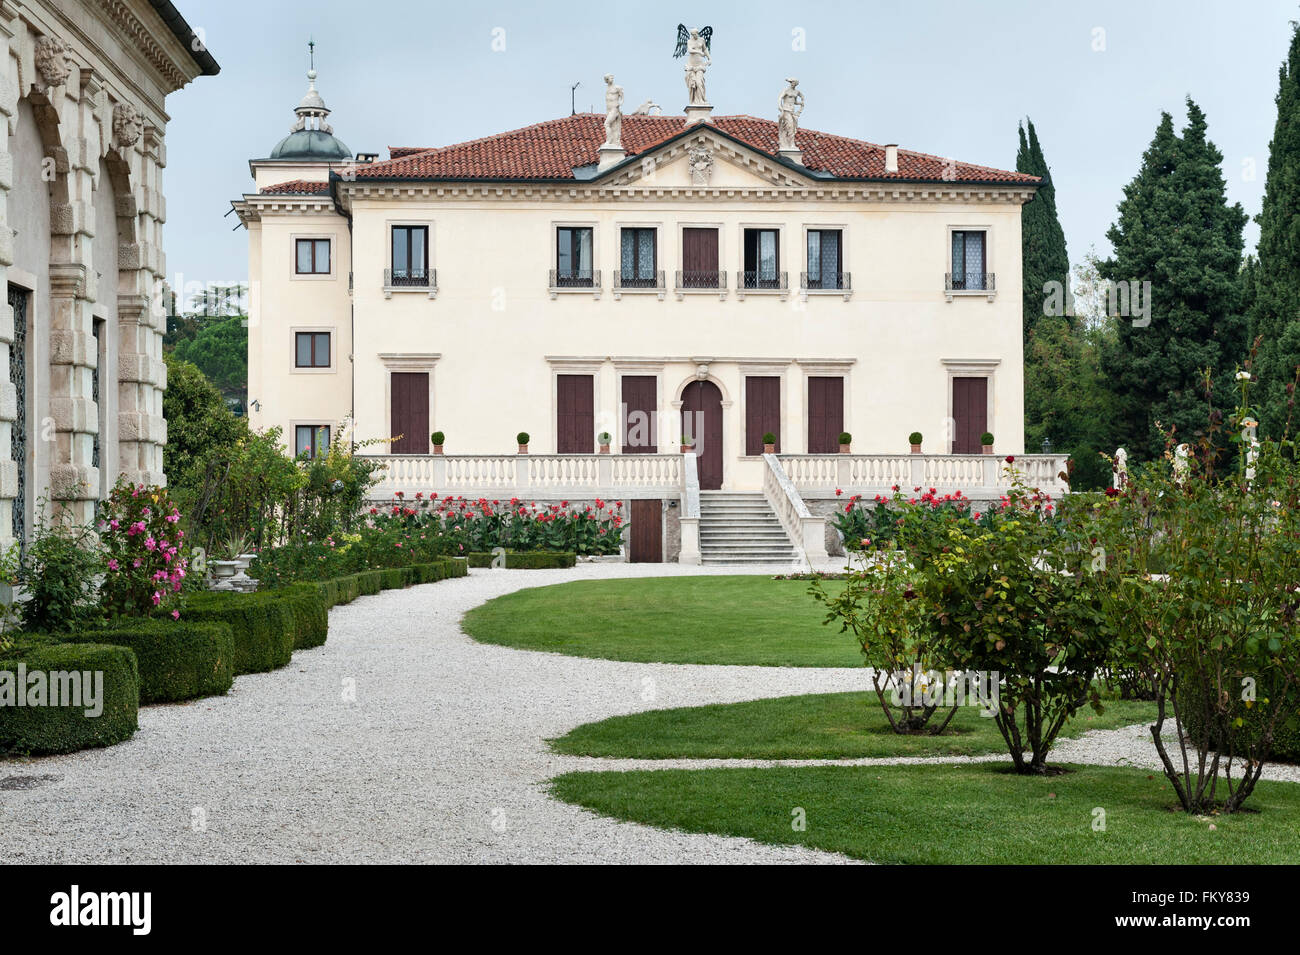 Villa Valmarana ai Nani, Vicenza, Italy. Famous for its frescoes by Tiepolo and for the dwarf statues along its garden wall Stock Photo